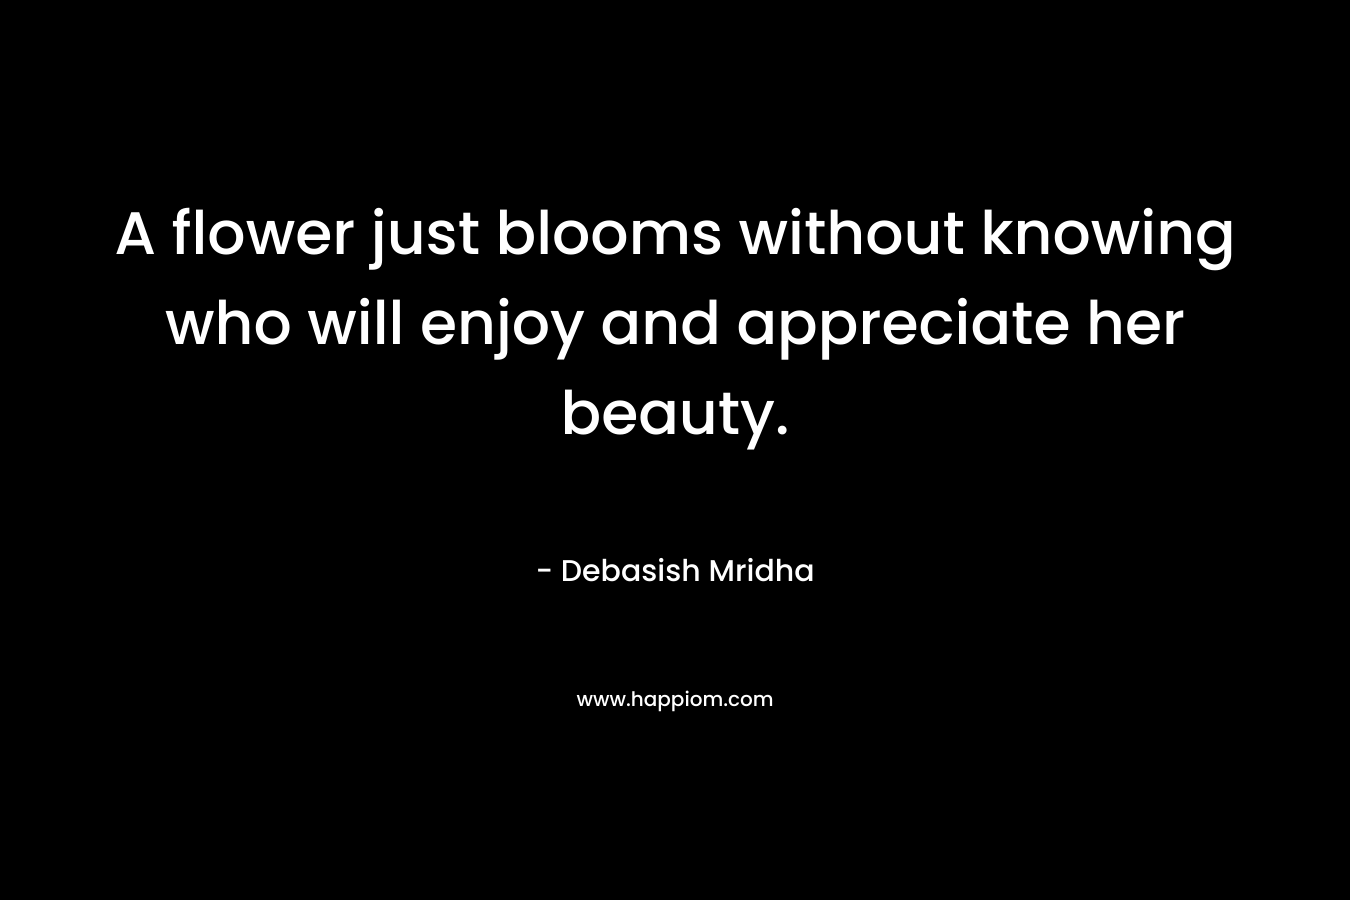 A flower just blooms without knowing who will enjoy and appreciate her beauty.